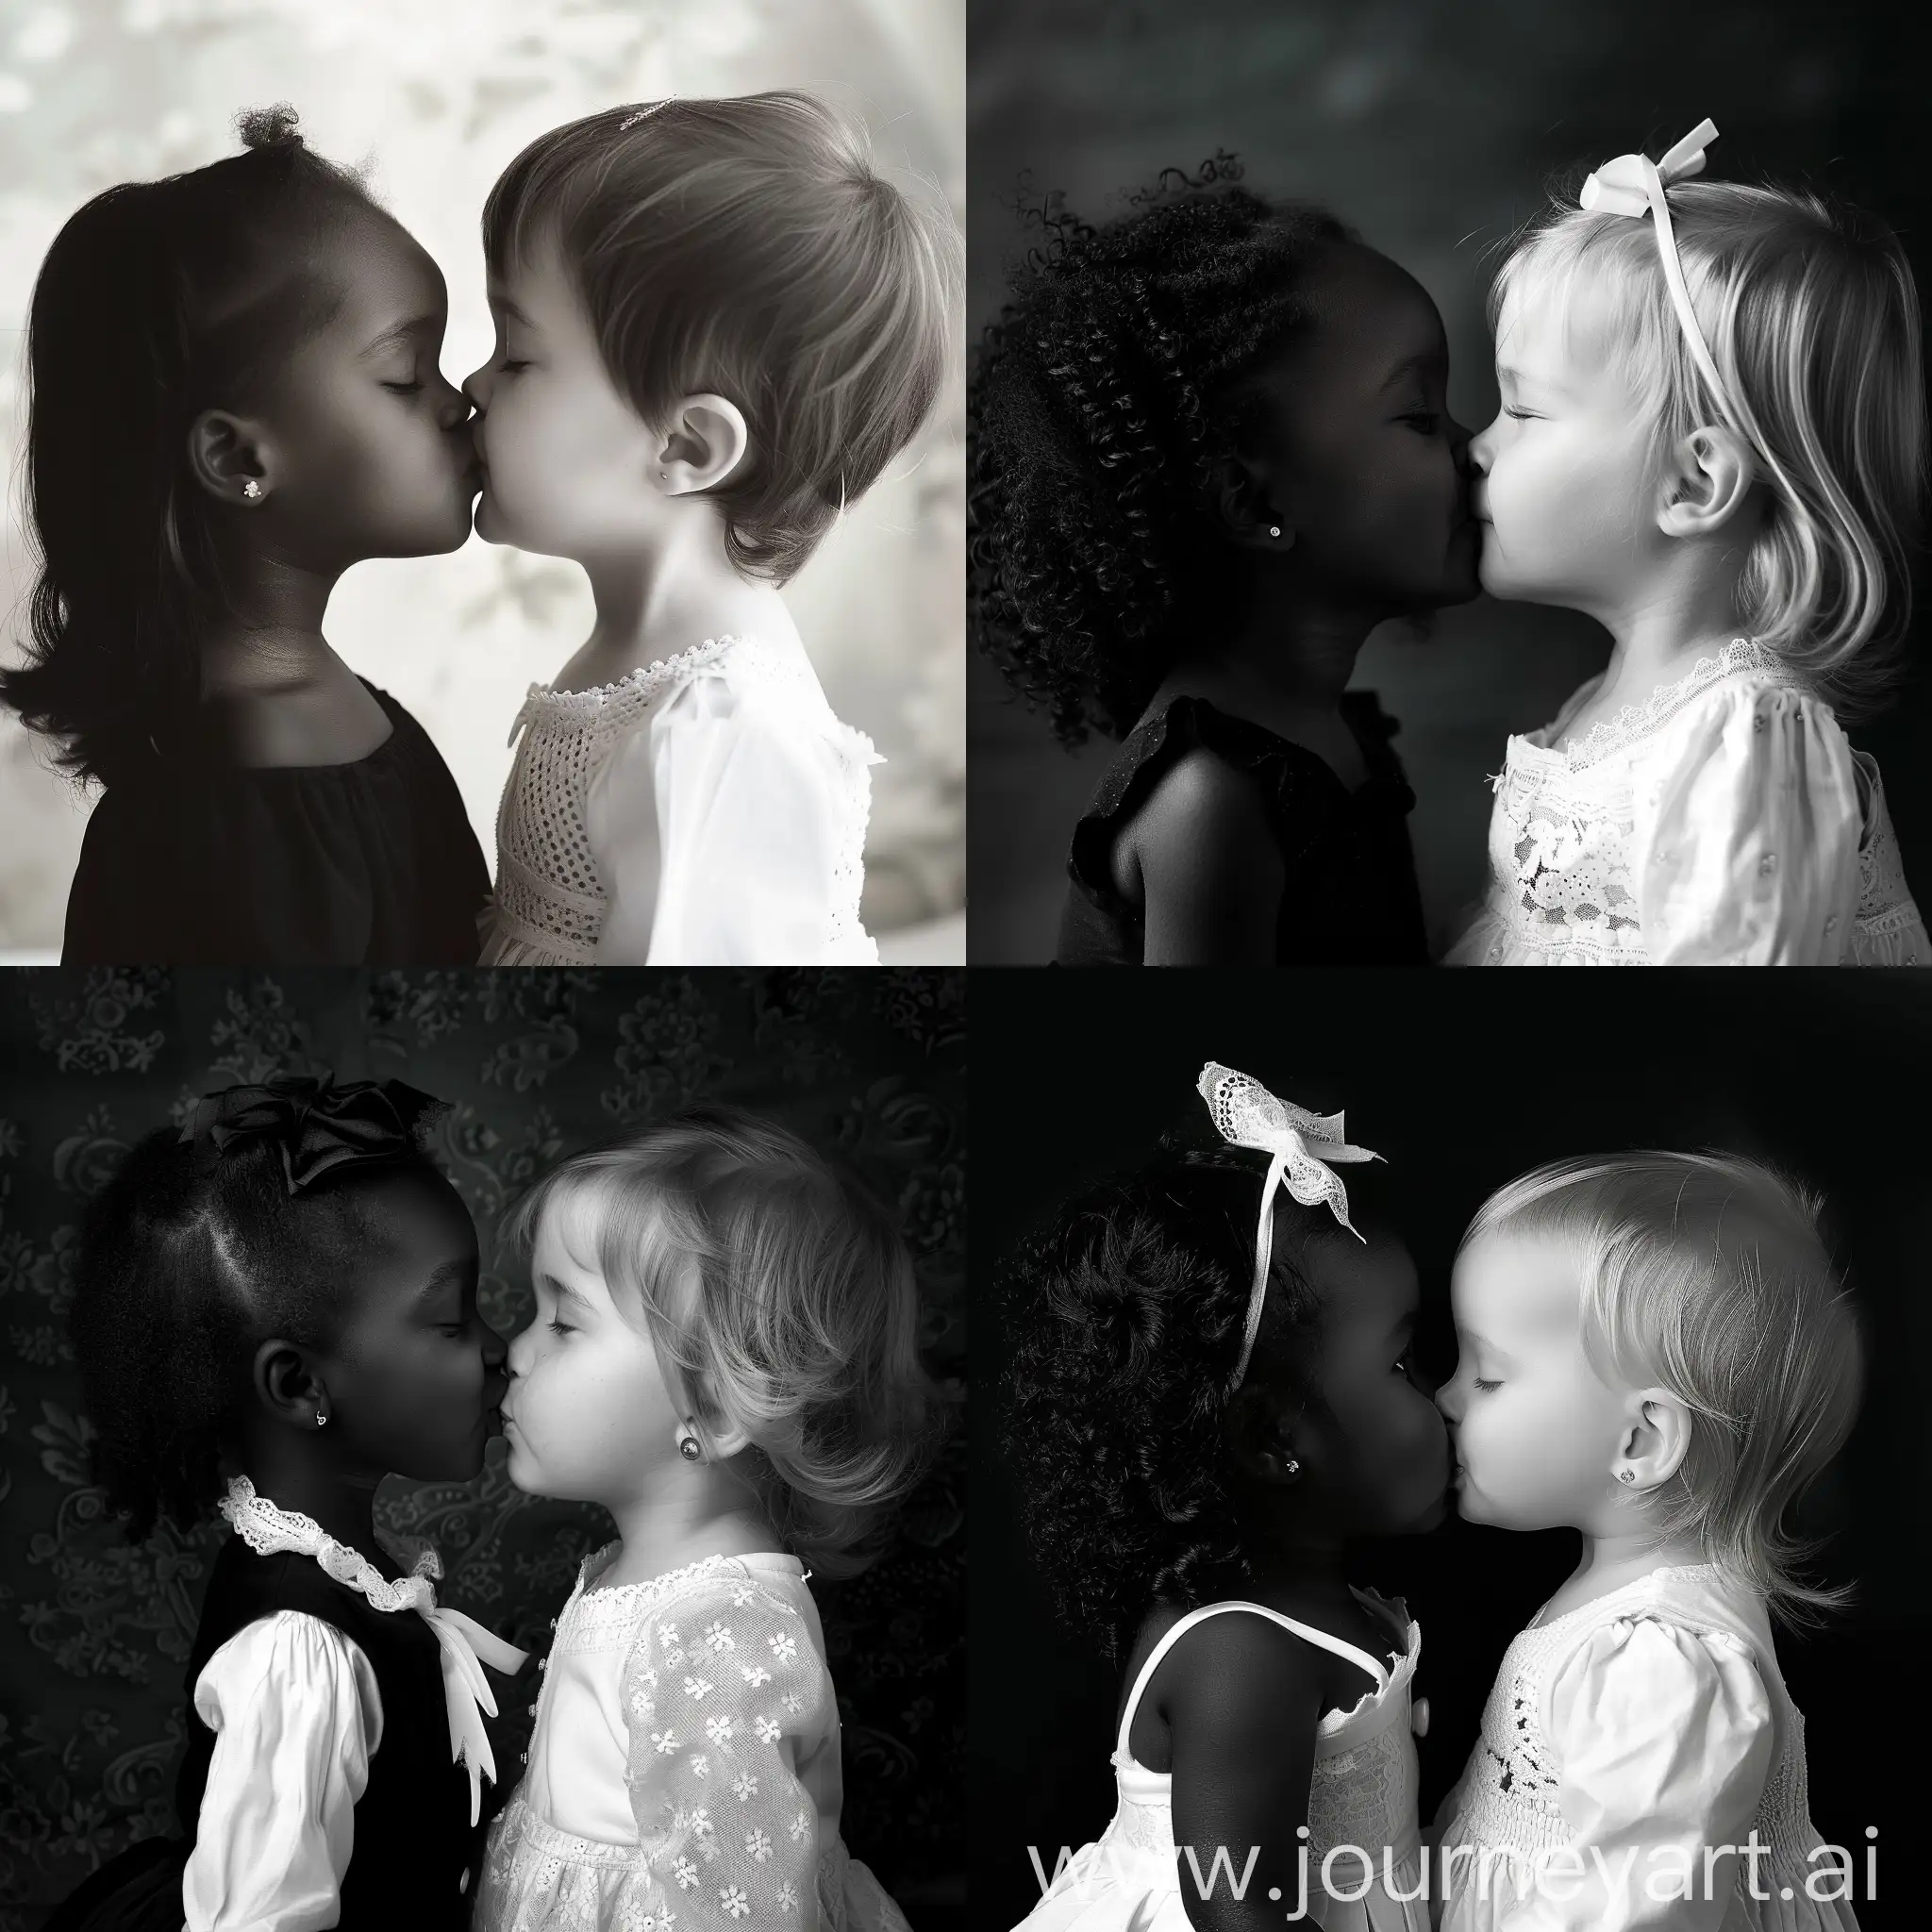 Interracial-Love-Affectionate-Kiss-Between-Black-and-White-Children